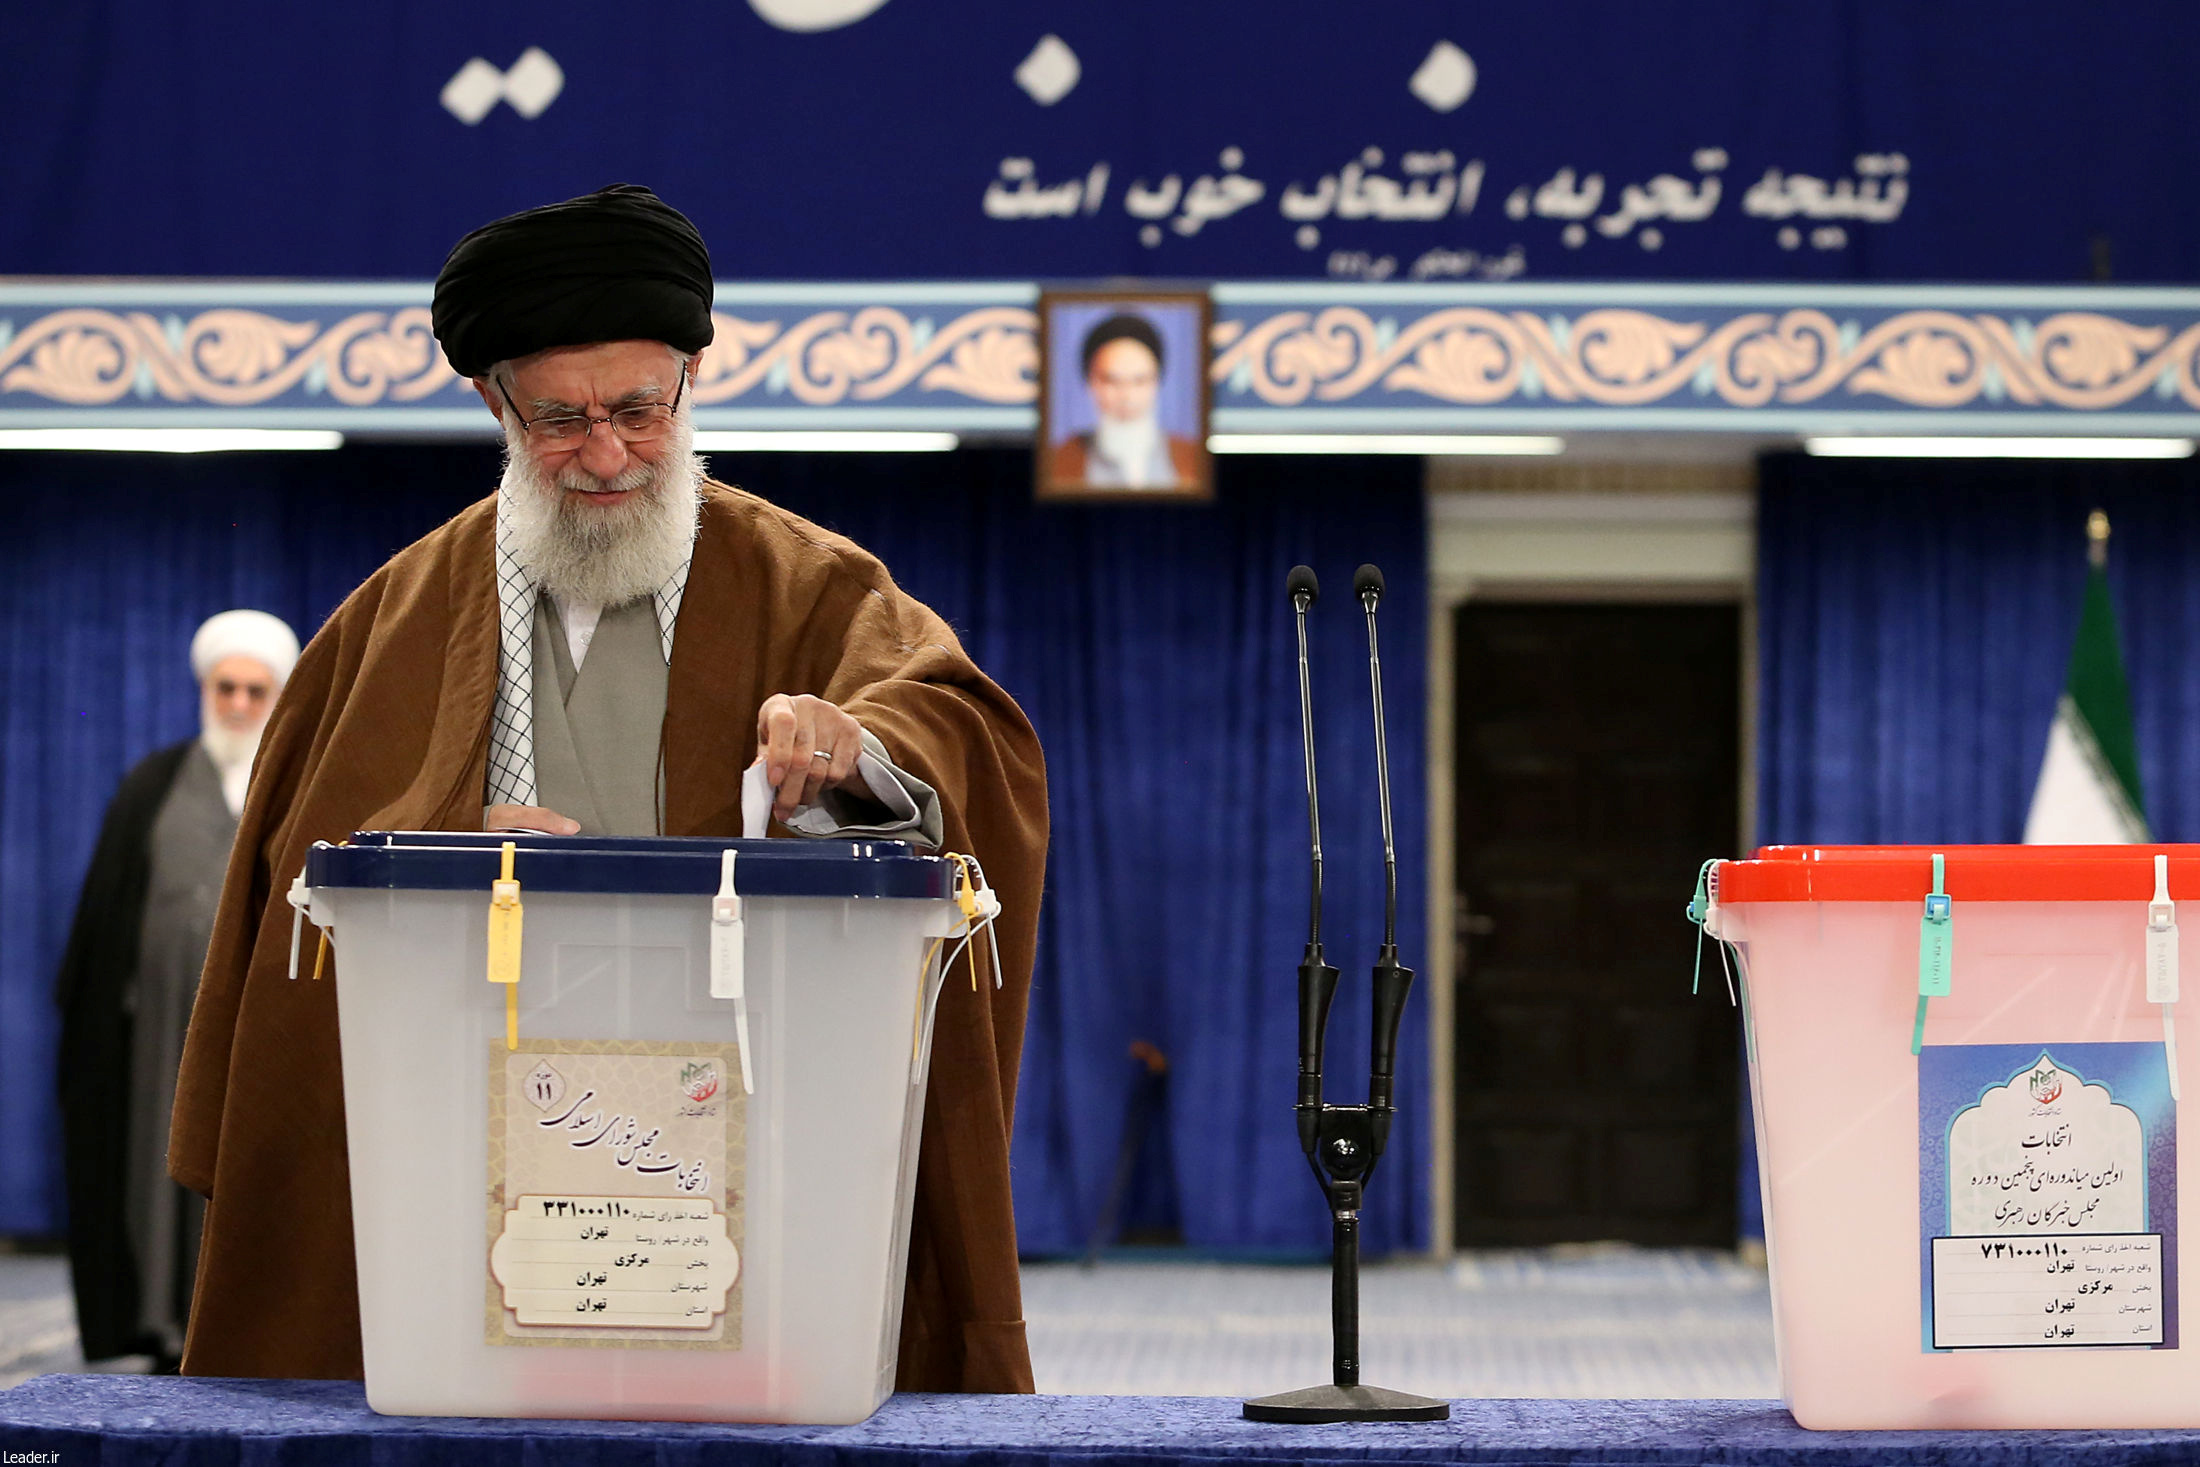 Parliamentary Elections in Iran: The Predicted Conservative Victory | INSS